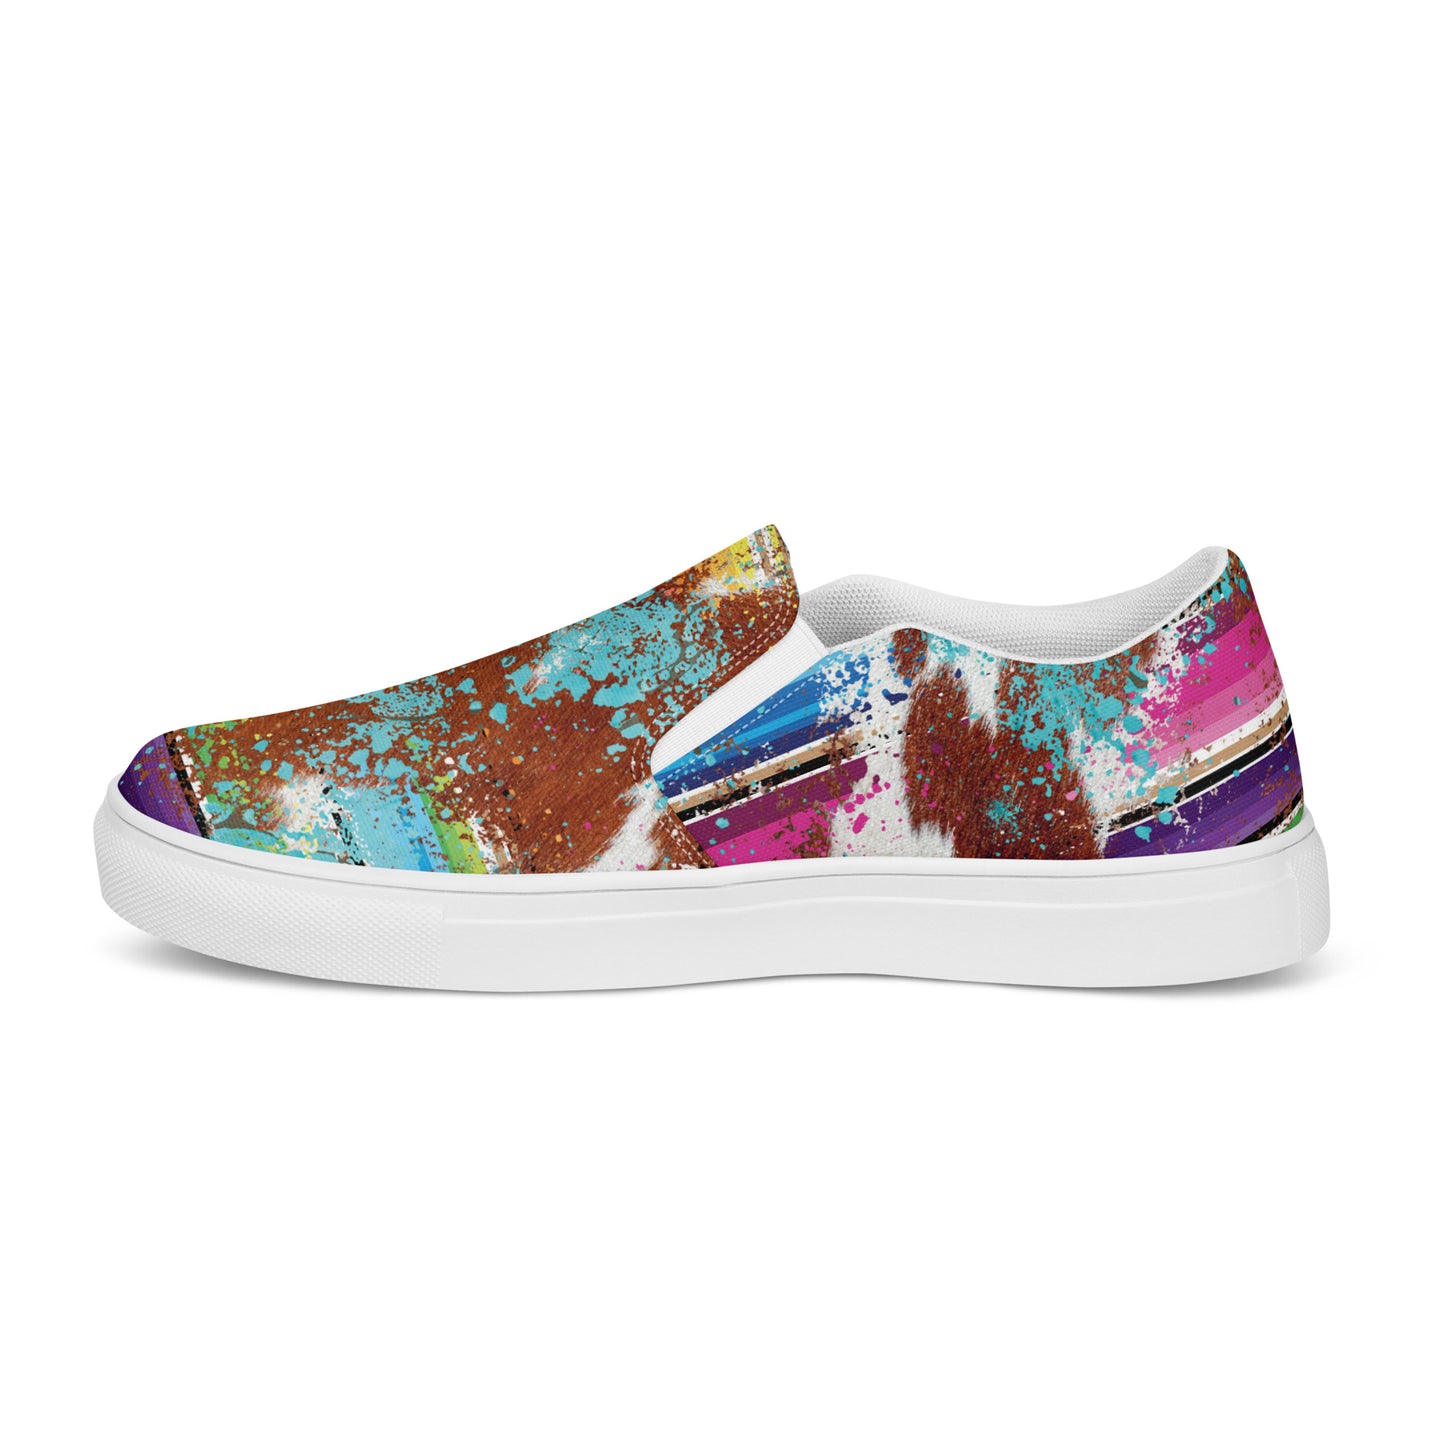 Pink Leopard Western Themed Women’s slip-on canvas shoes